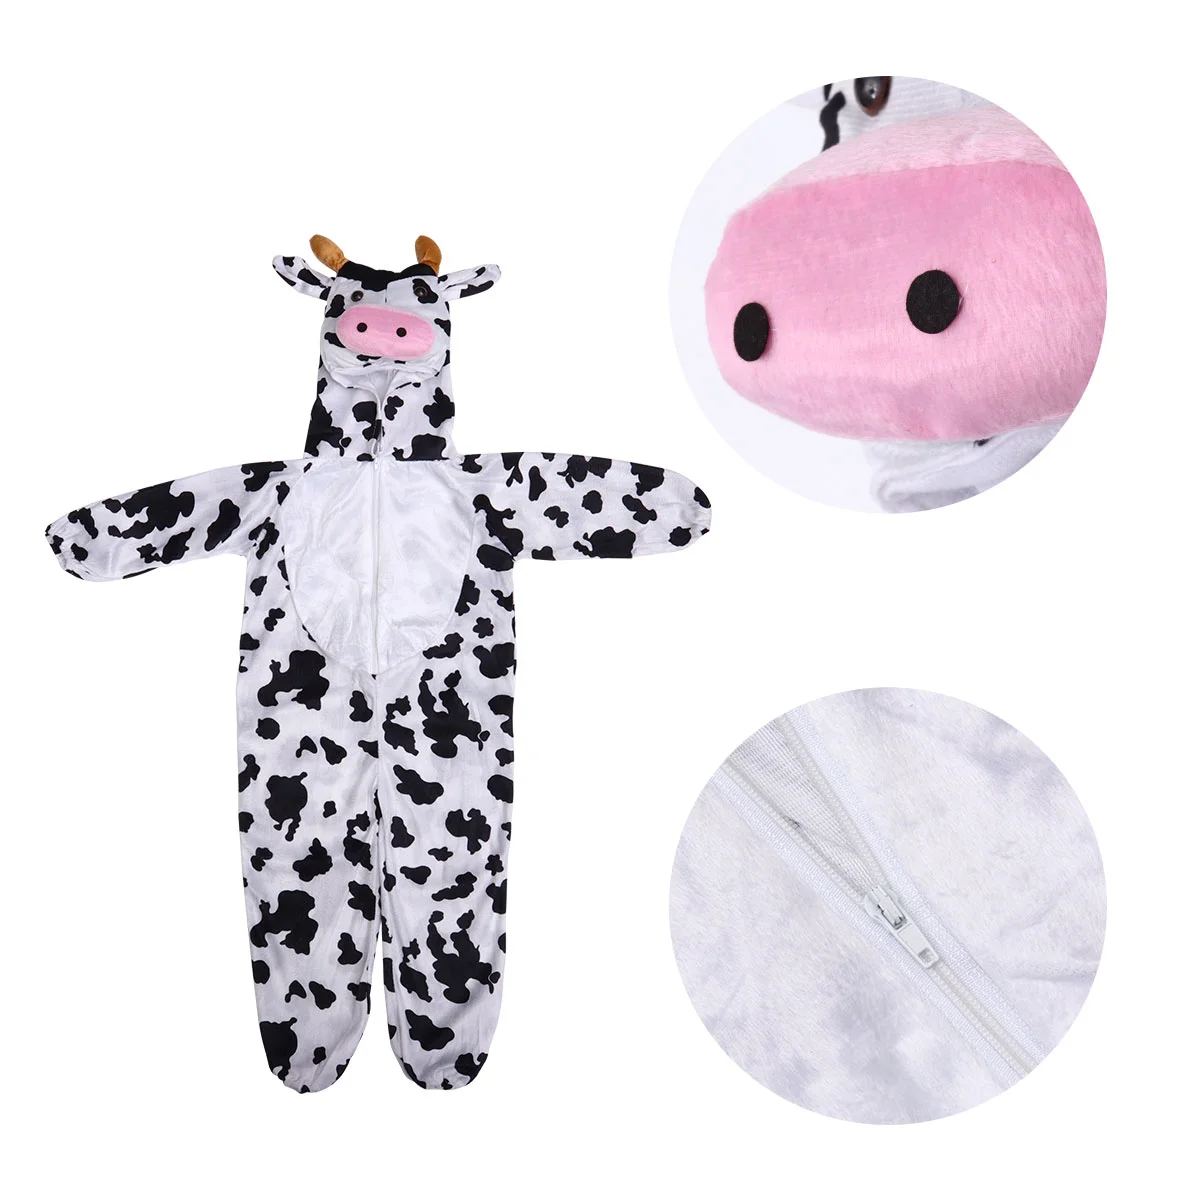 

Halloween Cow Costume Pyjamas Kids Girls Clothing Baby Outfits Party Jumpsuits Child